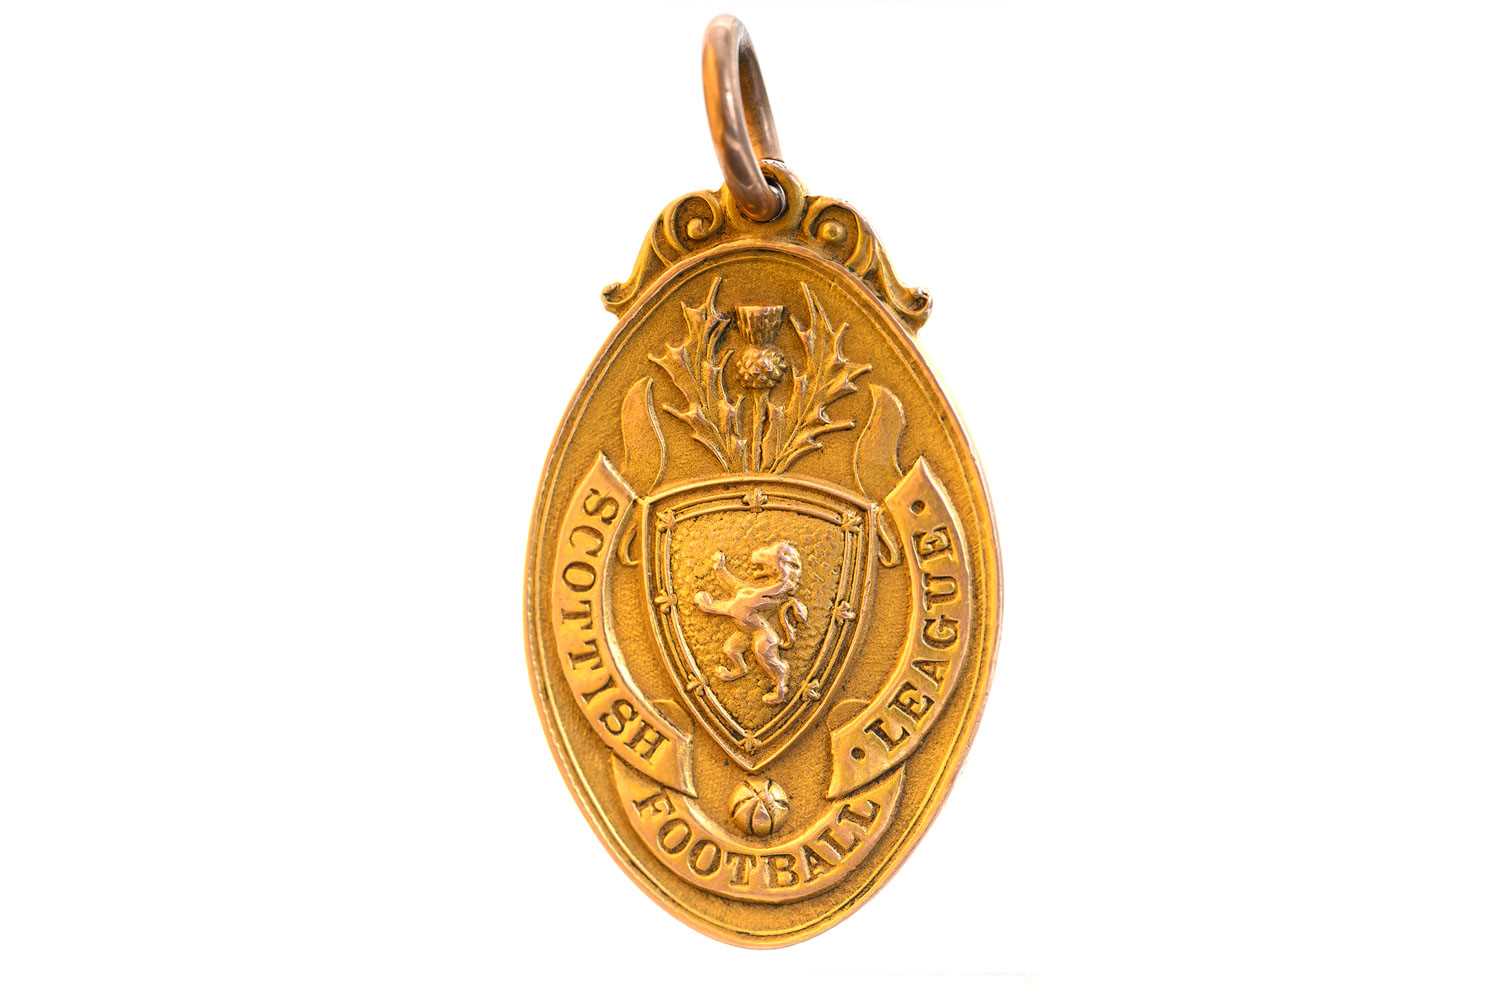 JAMES McSTAY OF CELTIC F.C., SCOTTISH FOOTBALL LEAGUE RUNNERS-UP GOLD MEDAL, 1930-31